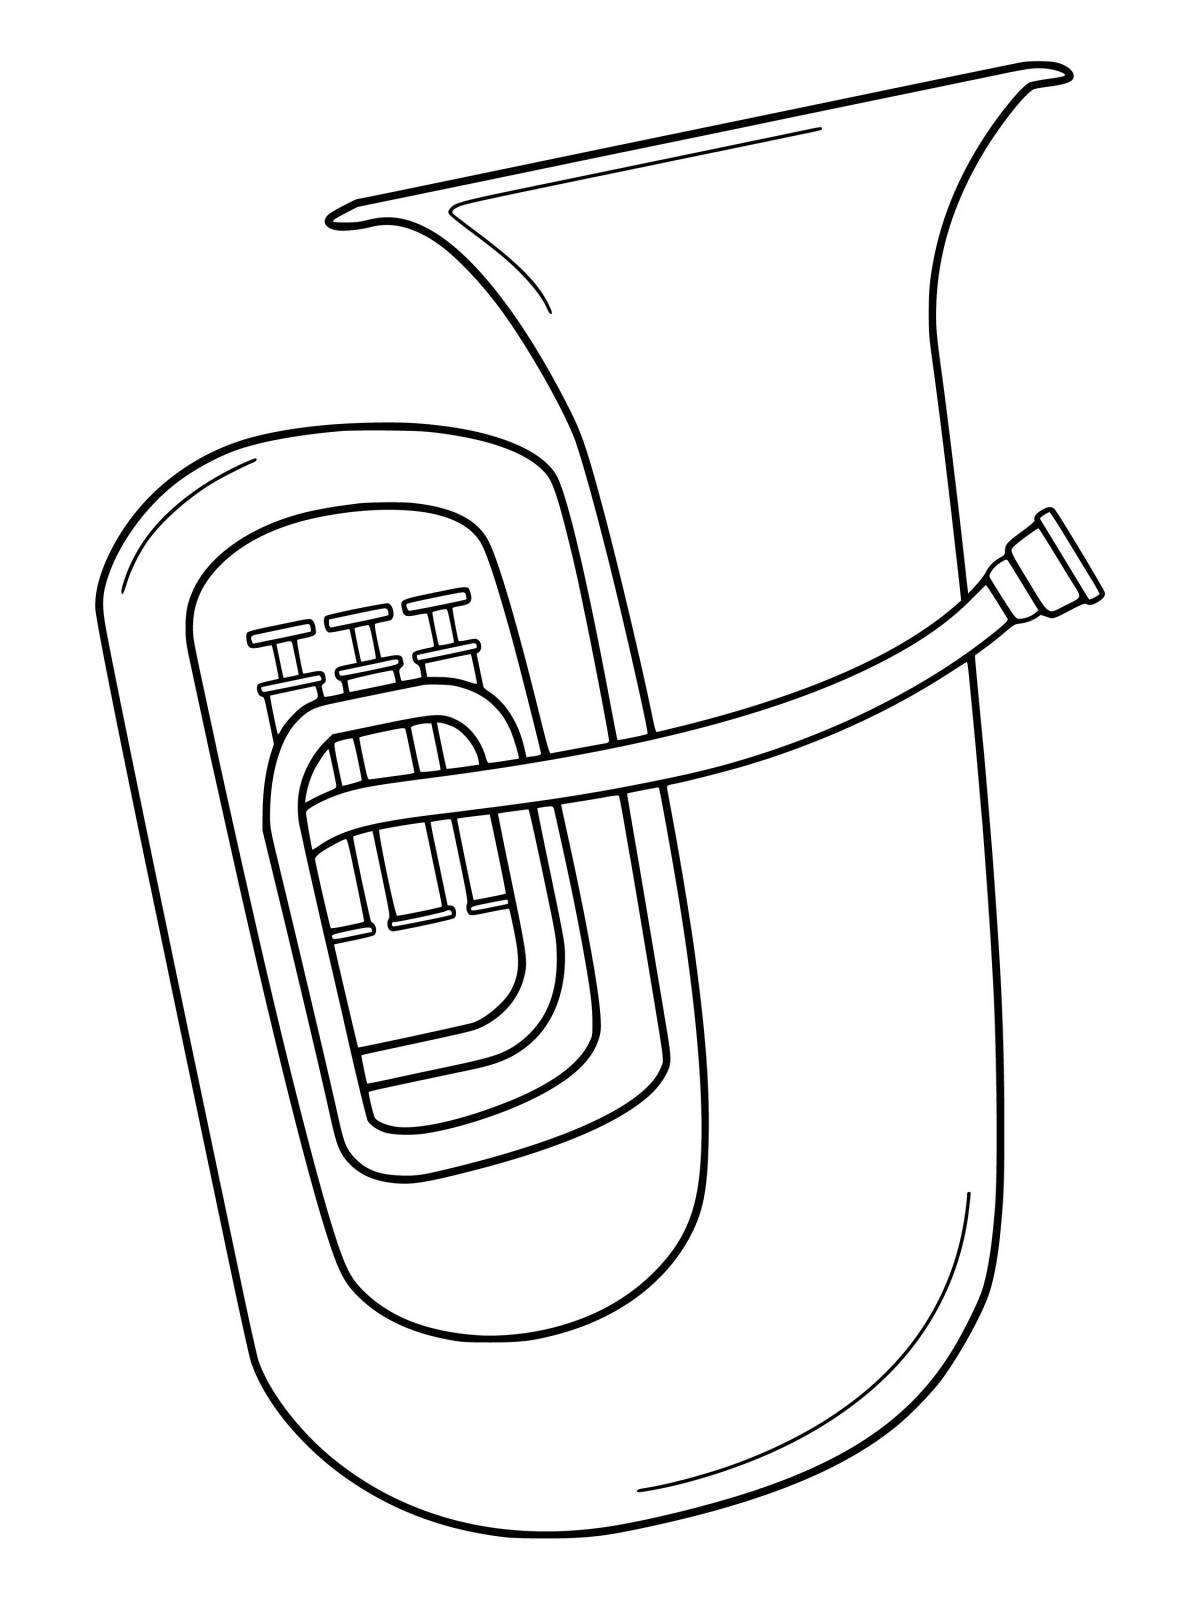 Colourful wind instruments coloring book